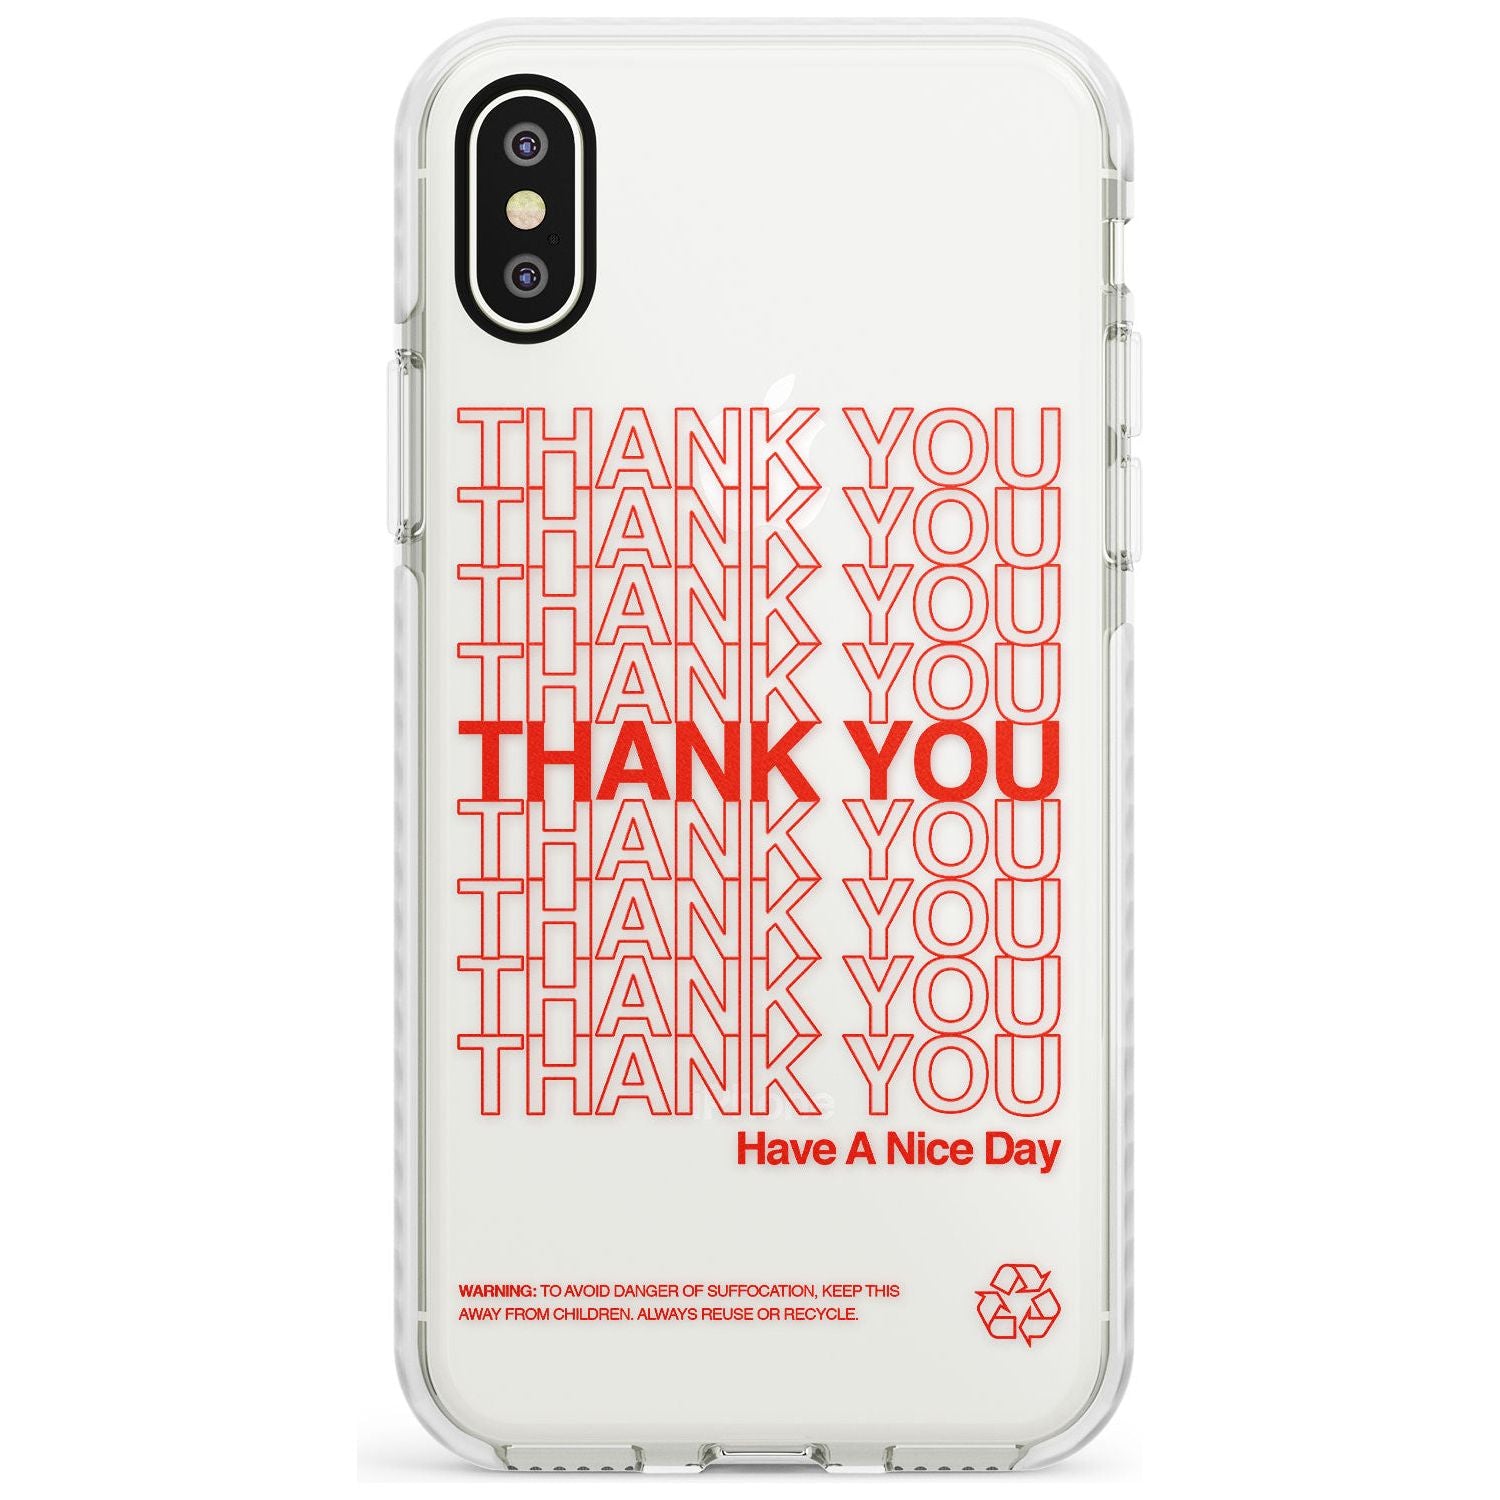 Classic Thank You Bag Design: Solid White + Red Impact Phone Case for iPhone X XS Max XR